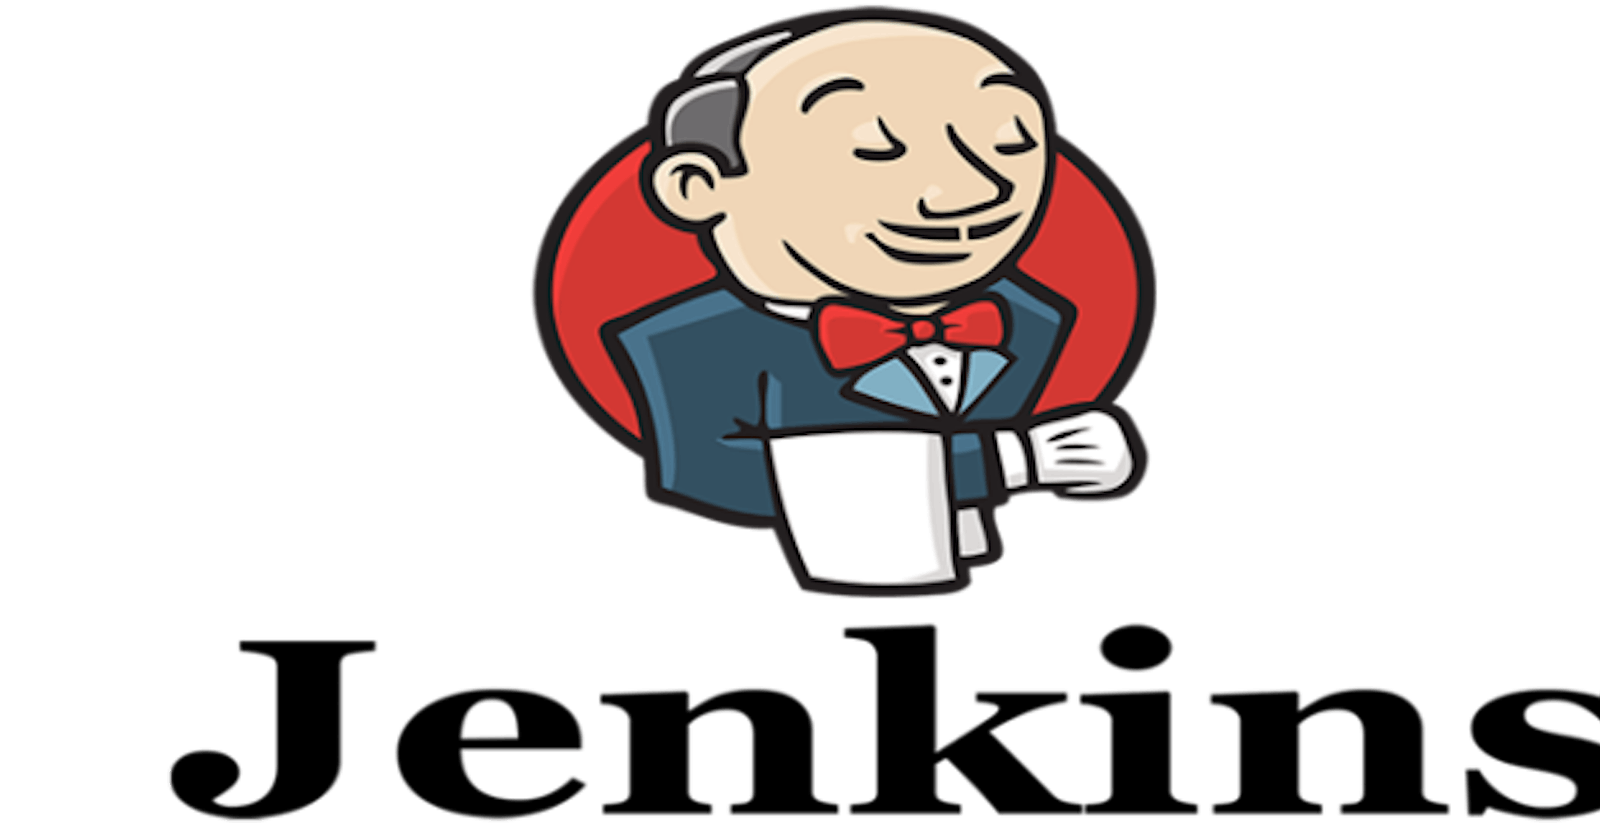 Getting Started with Jenkins